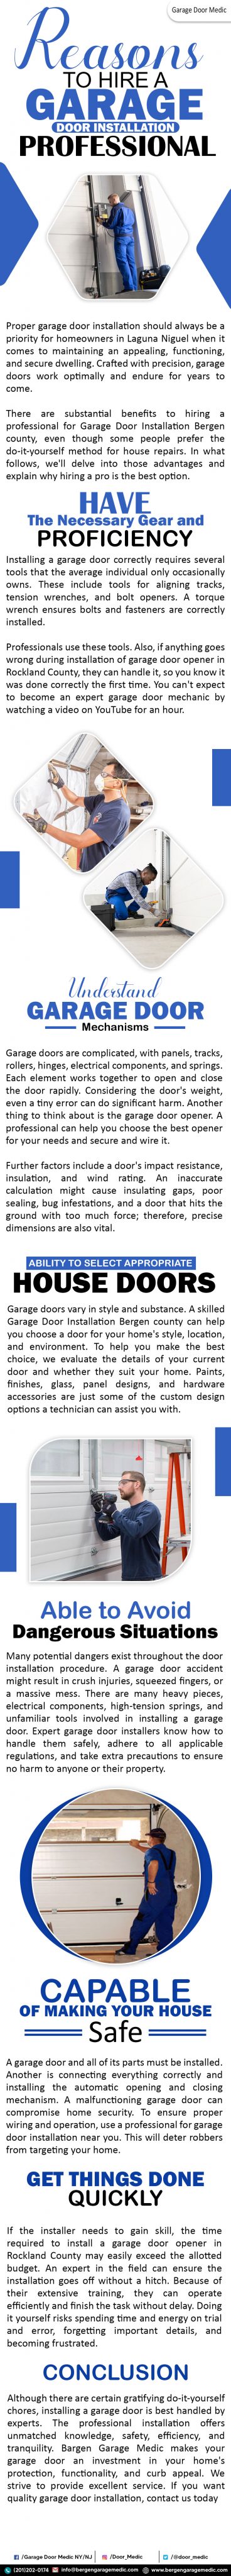 Reasons to Hire a Garage Door Installation Professional